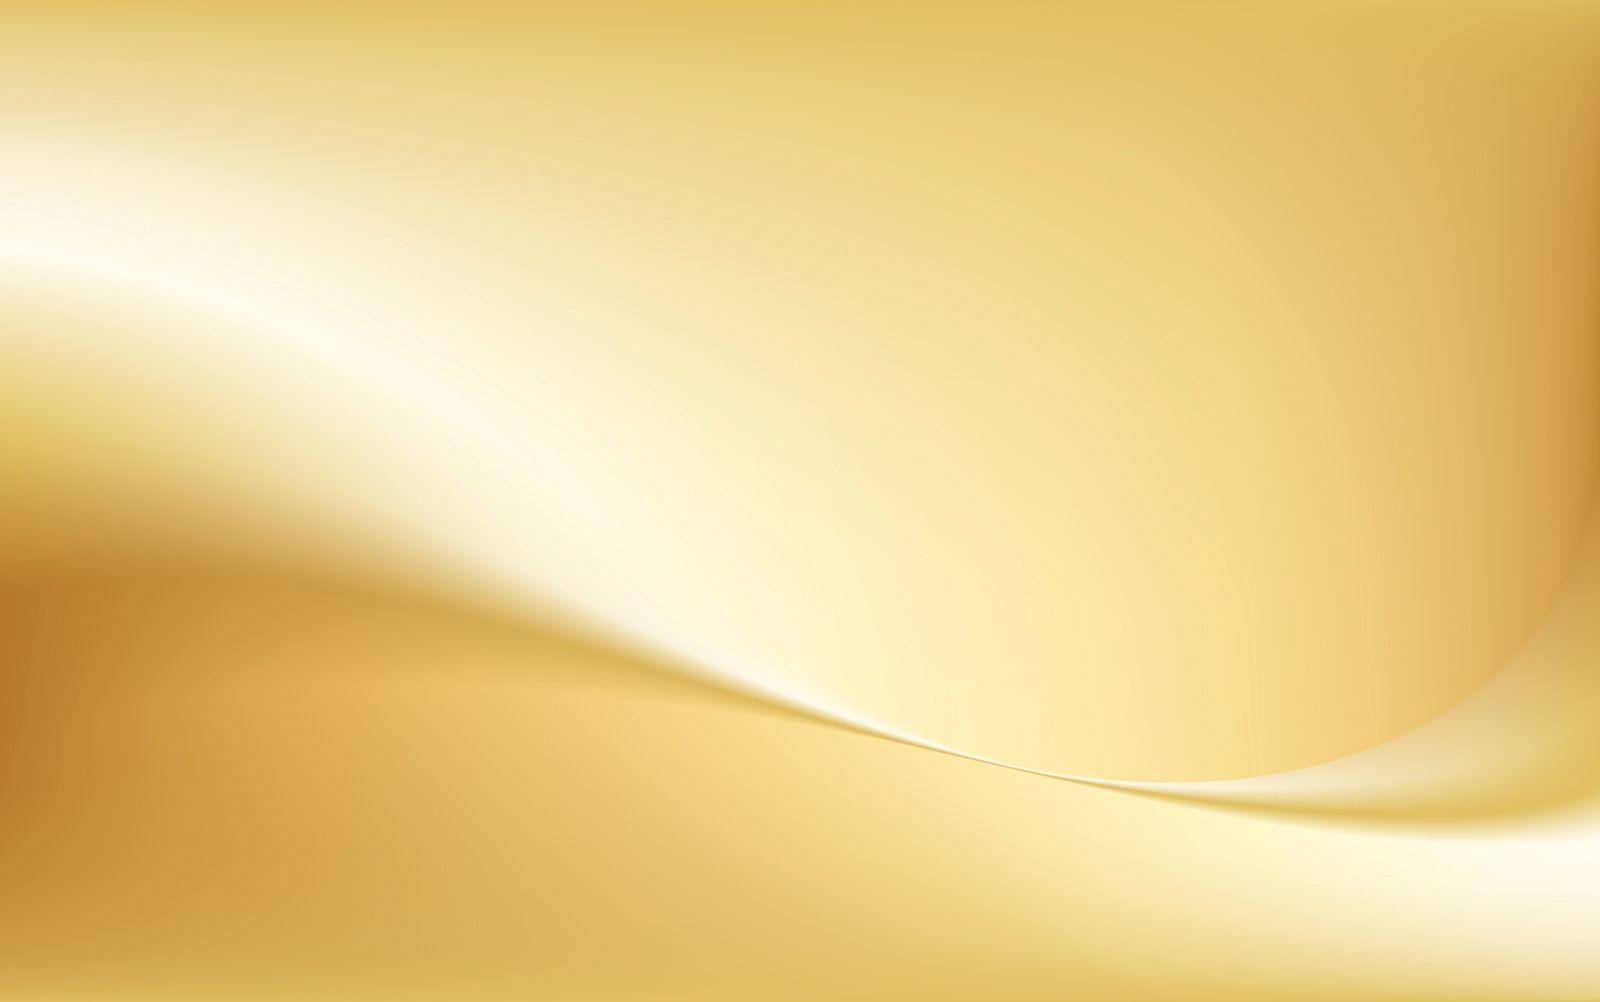 Abstract Wave Graphic In Plain Gold Wallpaper